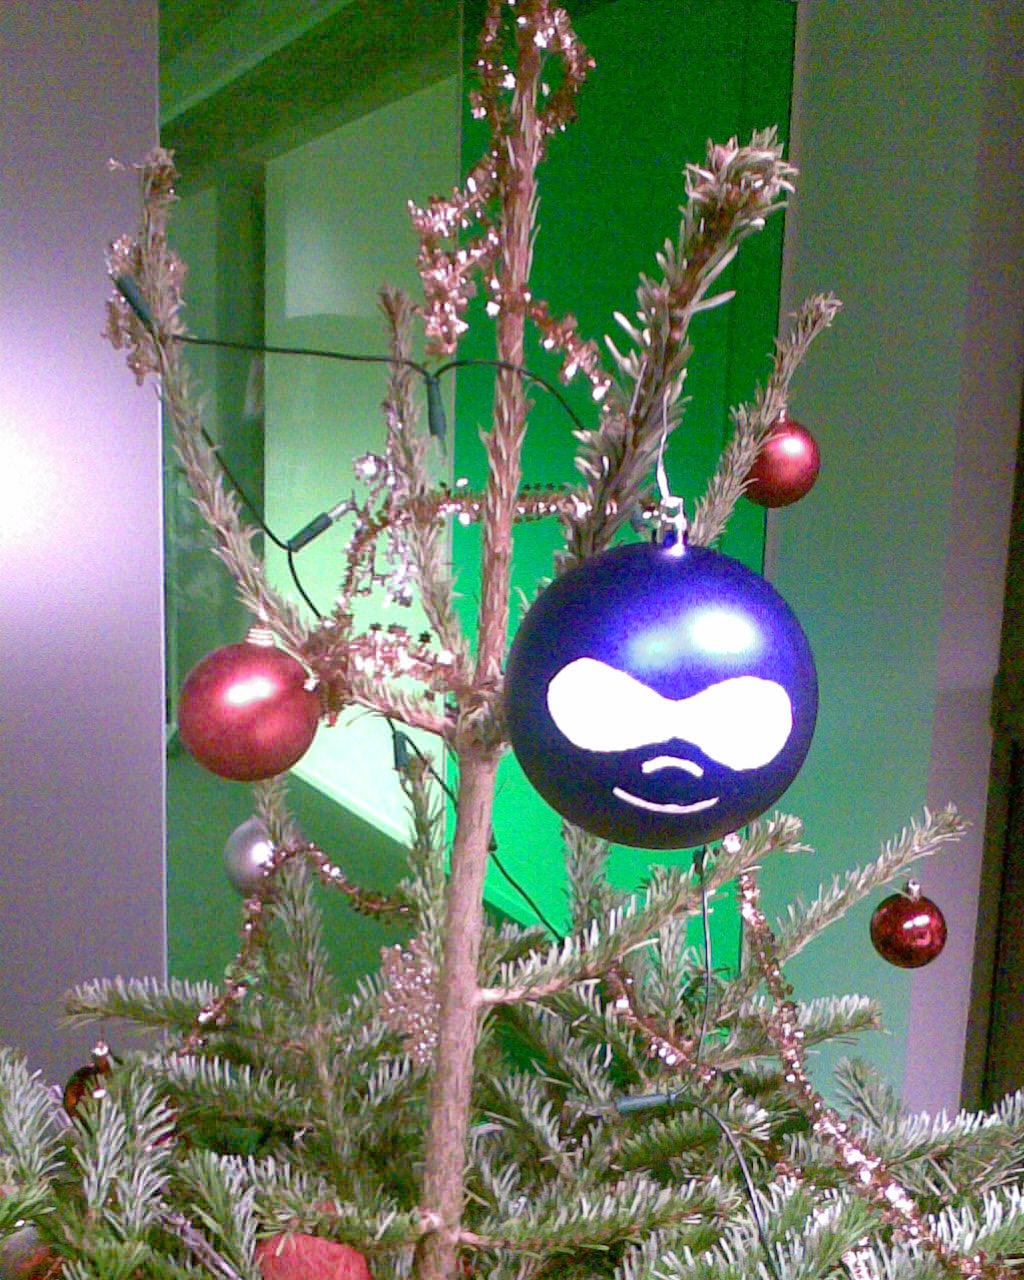 A close-up of a drupal chritmas ball in the christmas tree